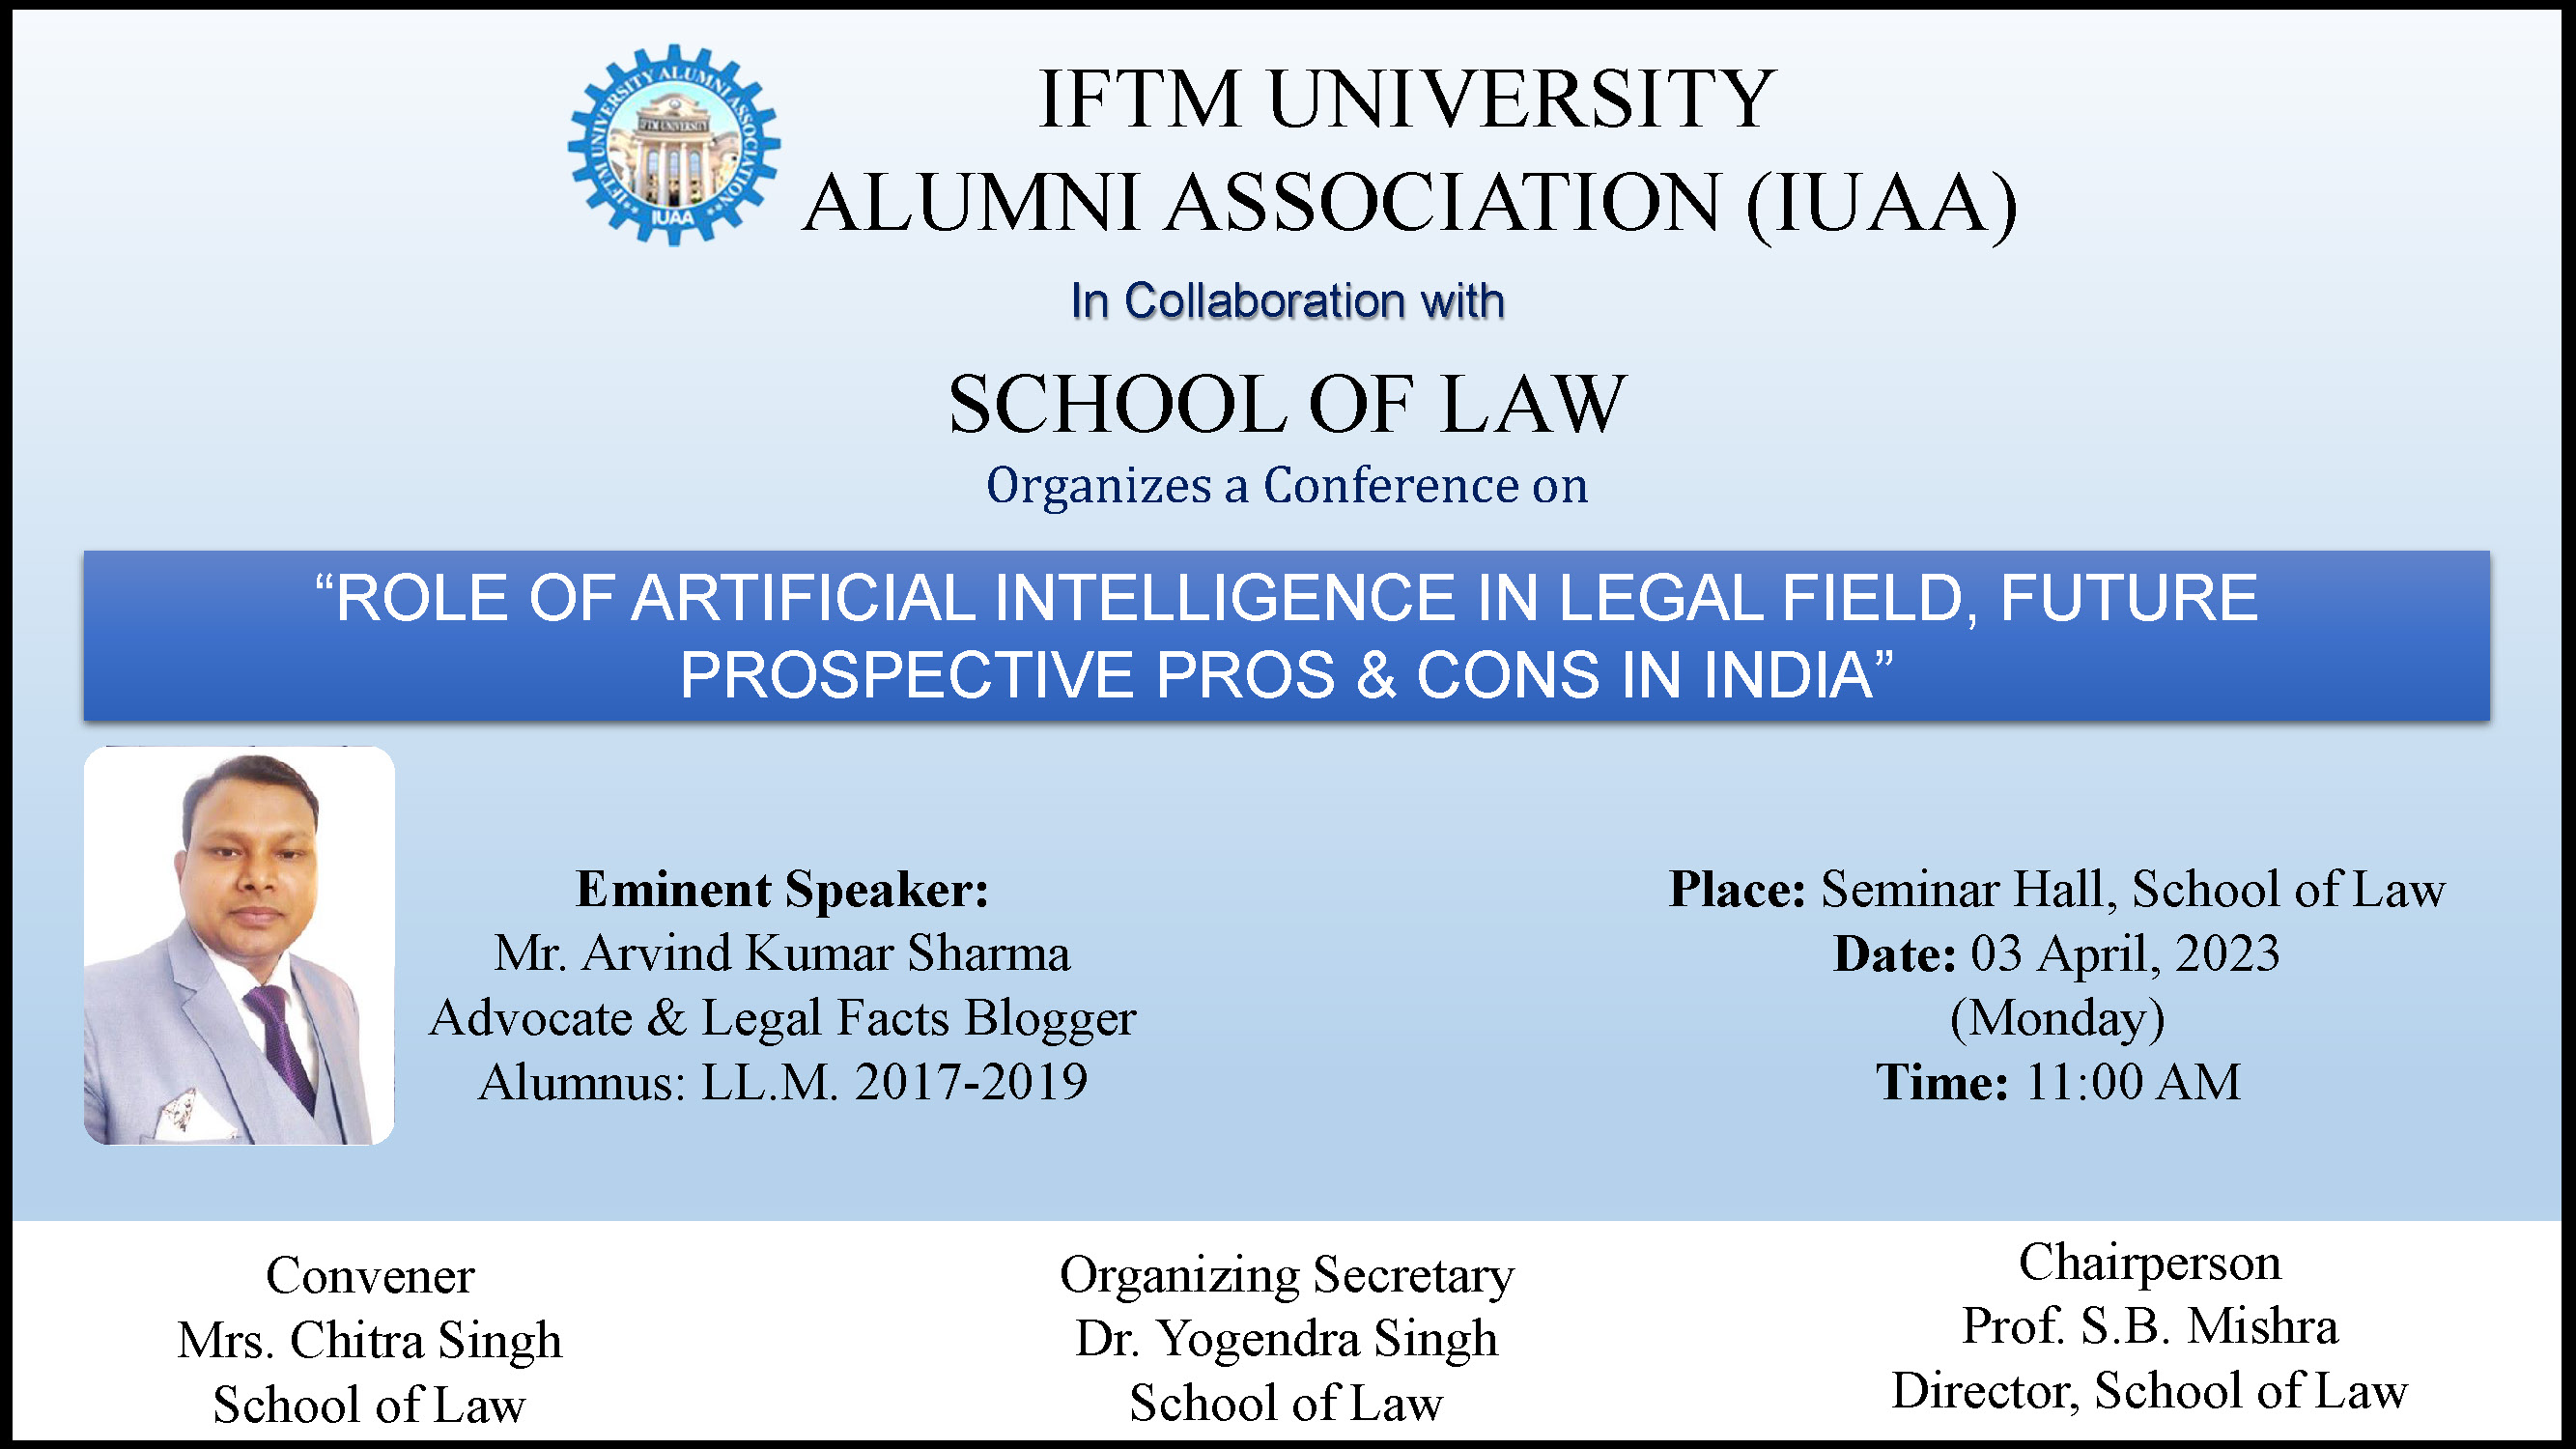 Role of Artificial Intelligence in Legal Field, Future Prospective Pros & Cons in India